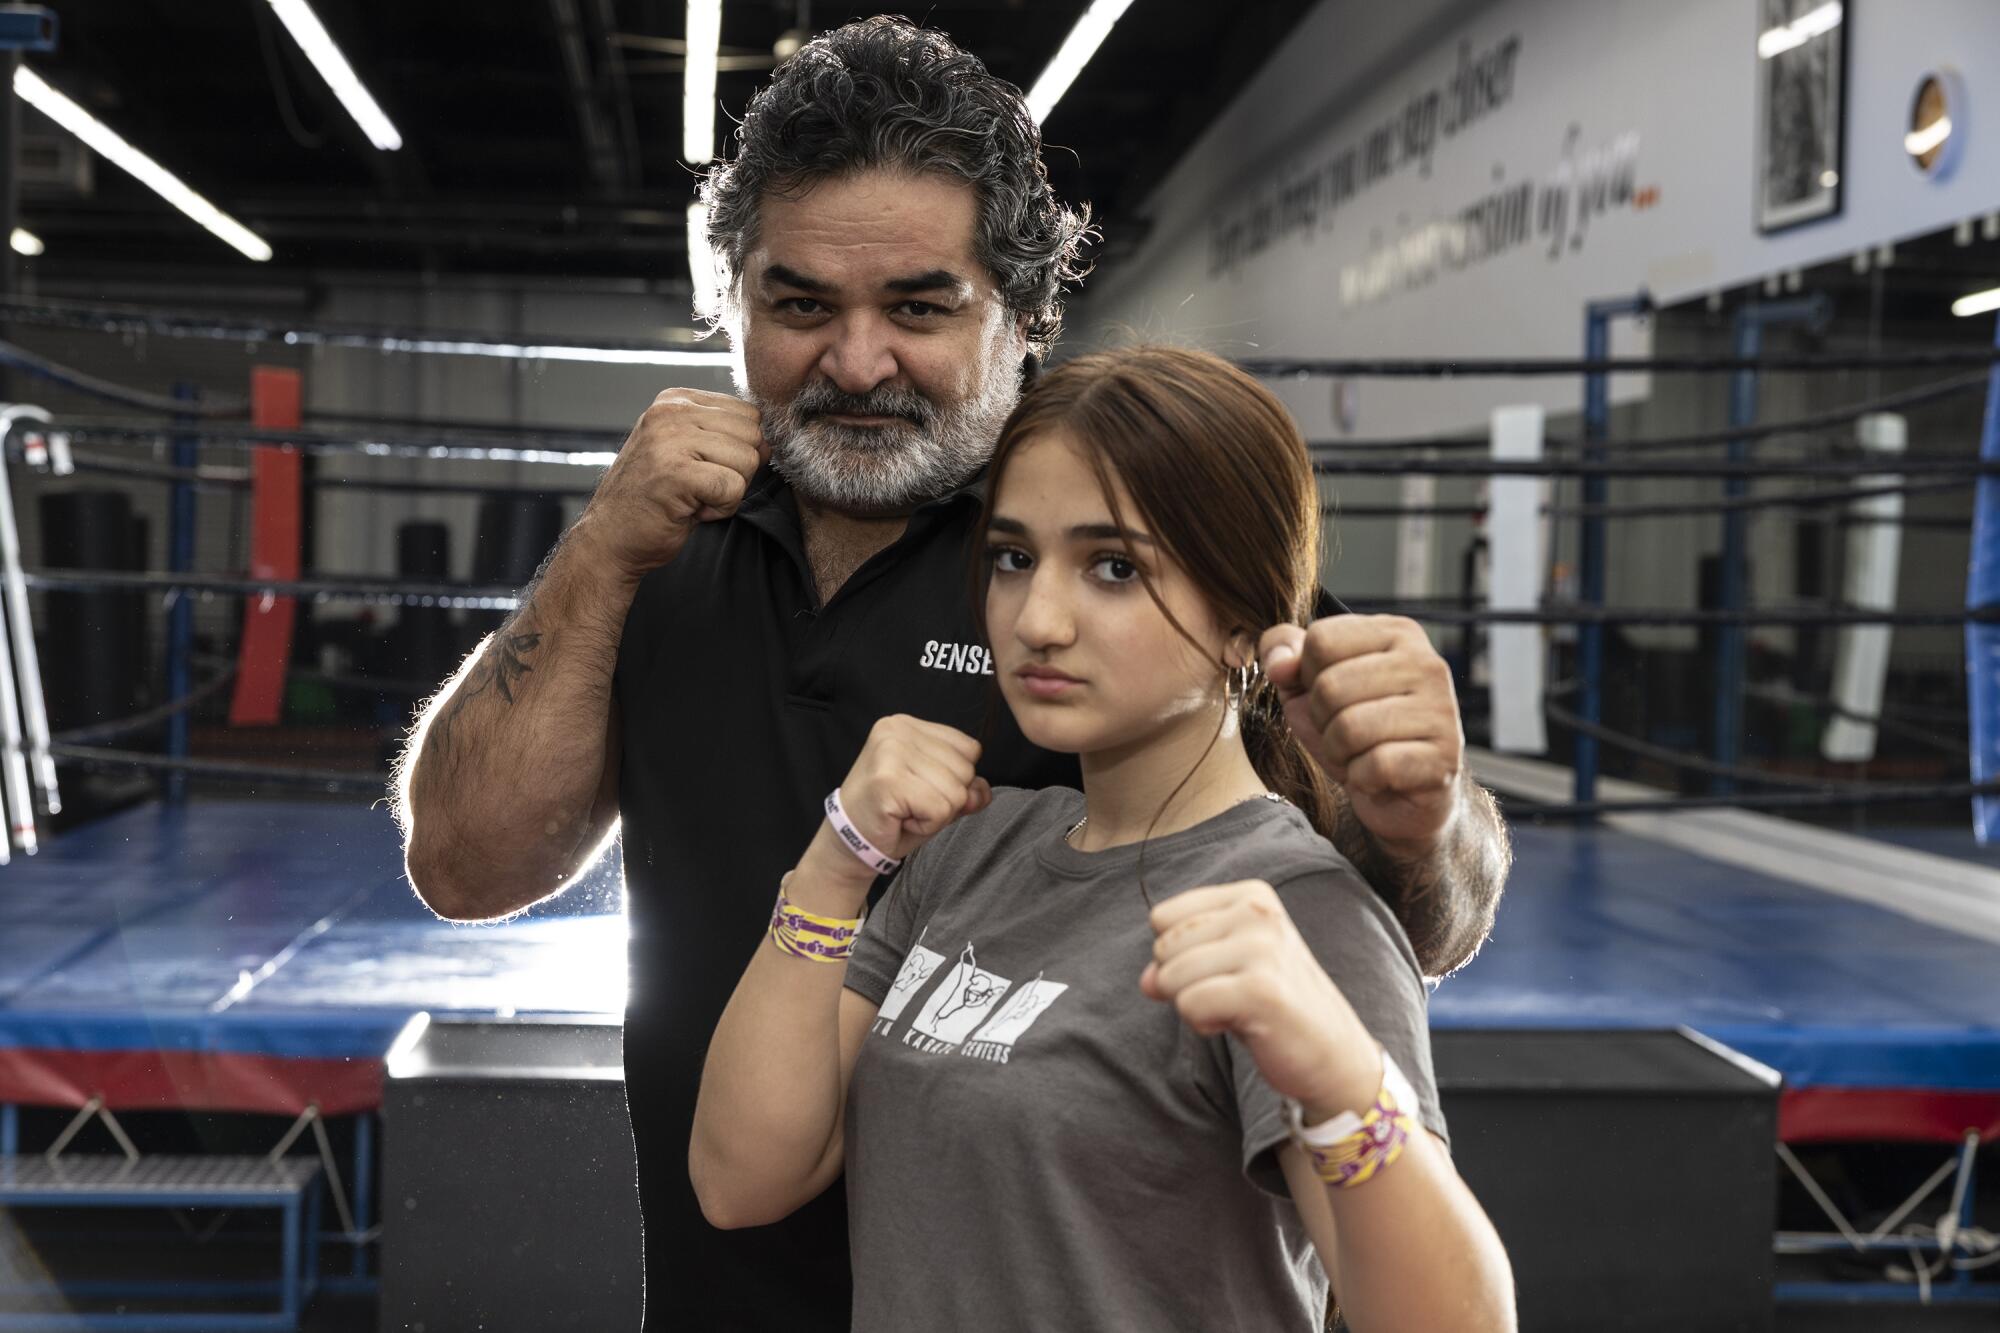 Fariborz Azhakh and his daughter Katana pose with their fists up.